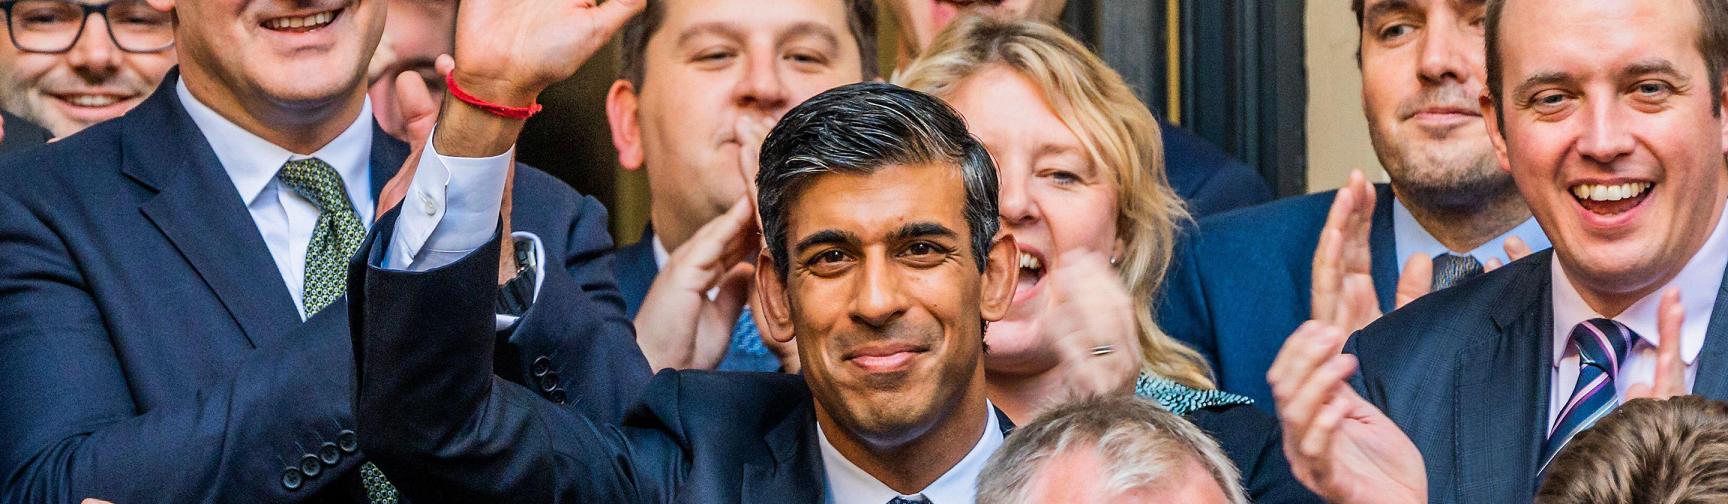 Rishi Sunak at CCHQ after winning the Conservative Party leadership contest following Liz Truss's resignation.